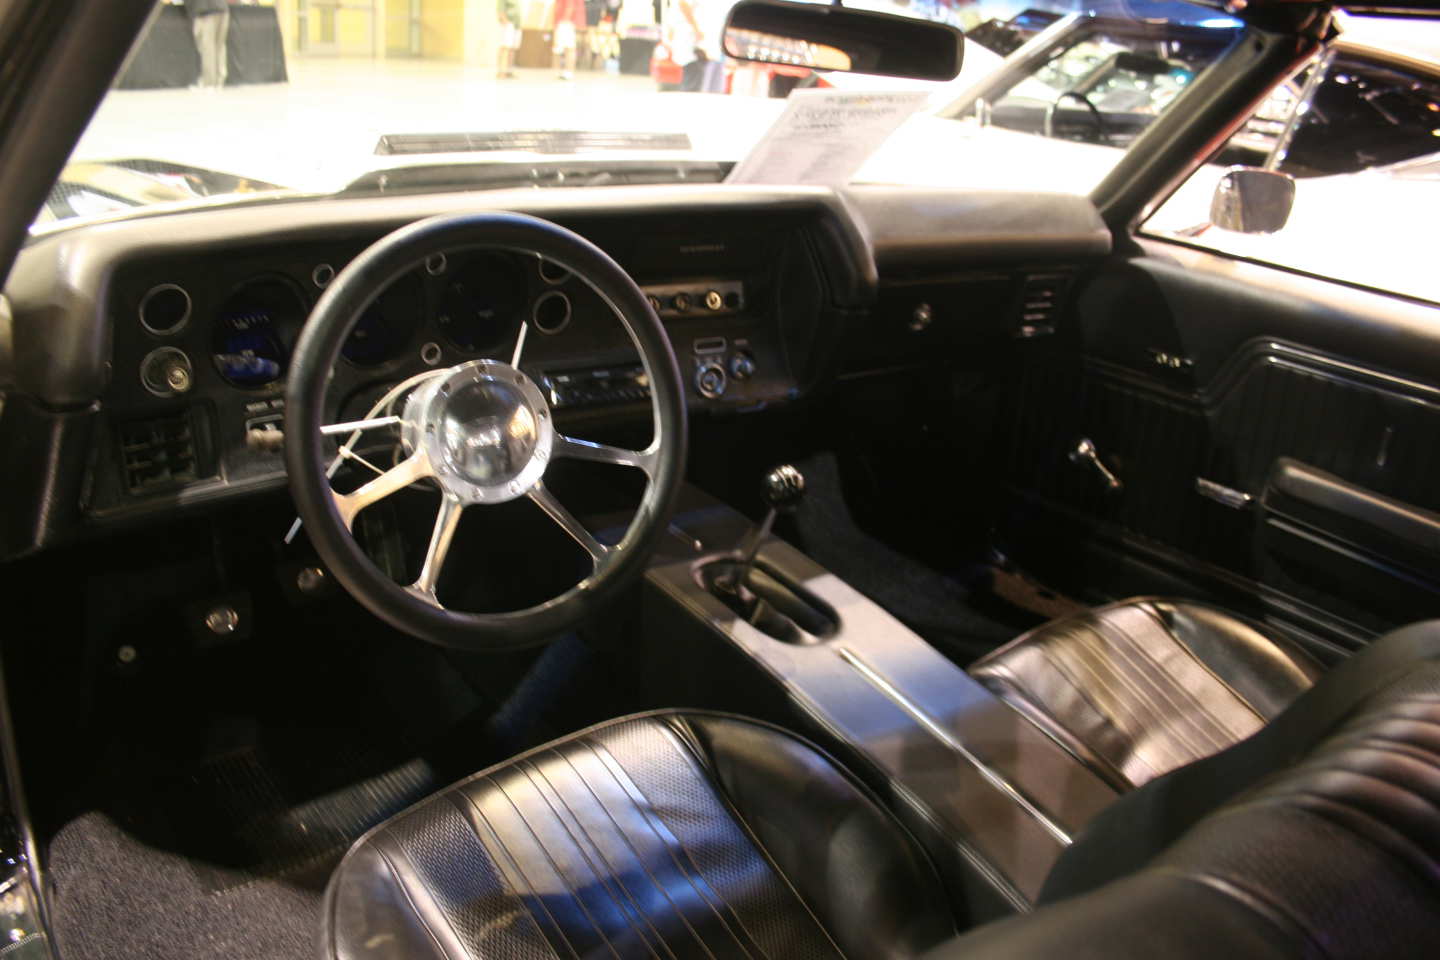 4th Image of a 1971 CHEVROLET CHEVELLE SS